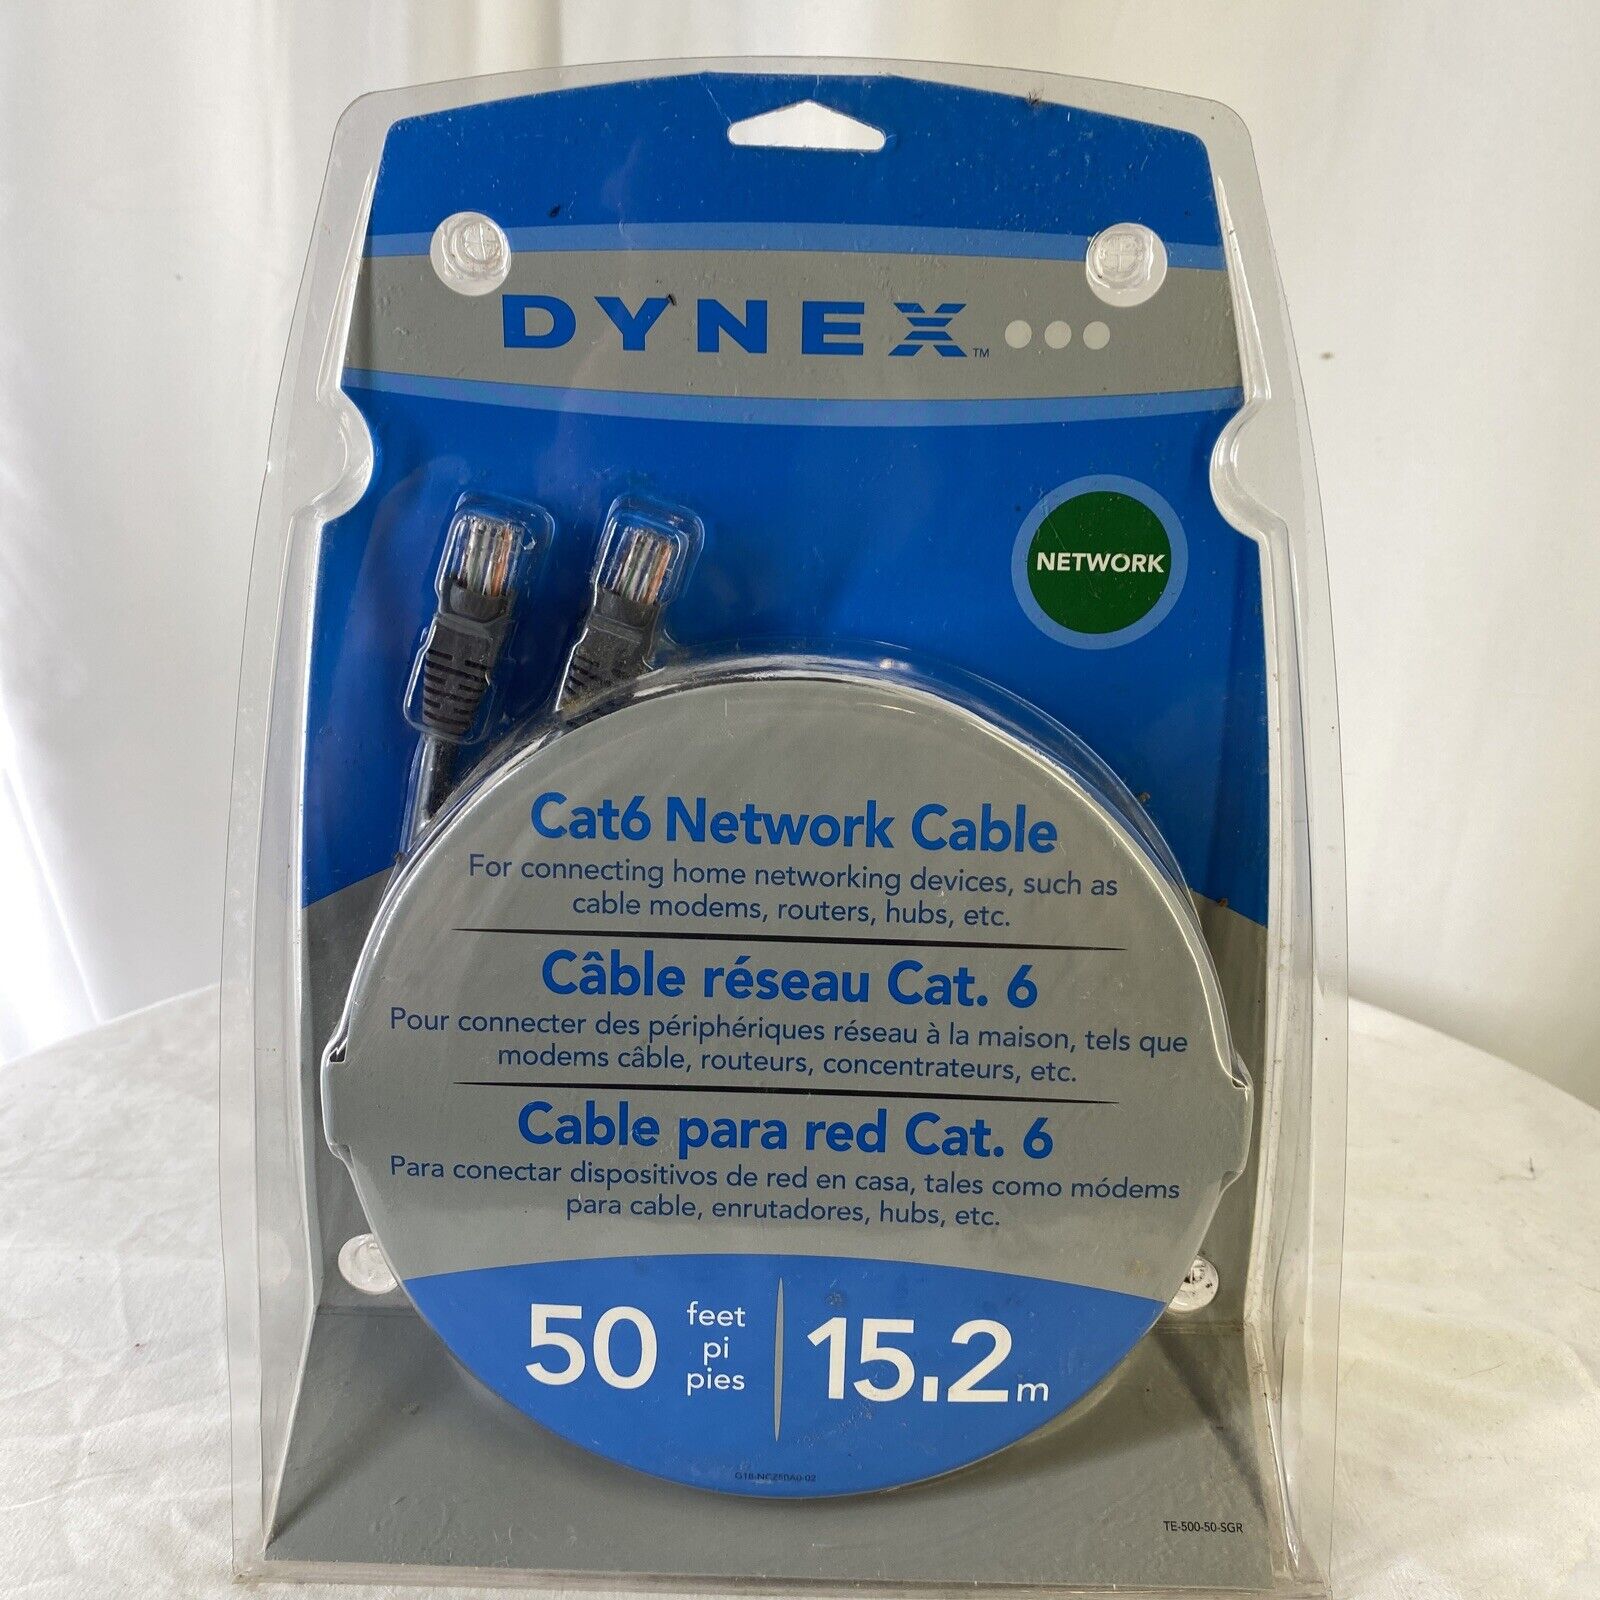 Dynex Cat6 Network Cable 50ft 15.2m  Brand New